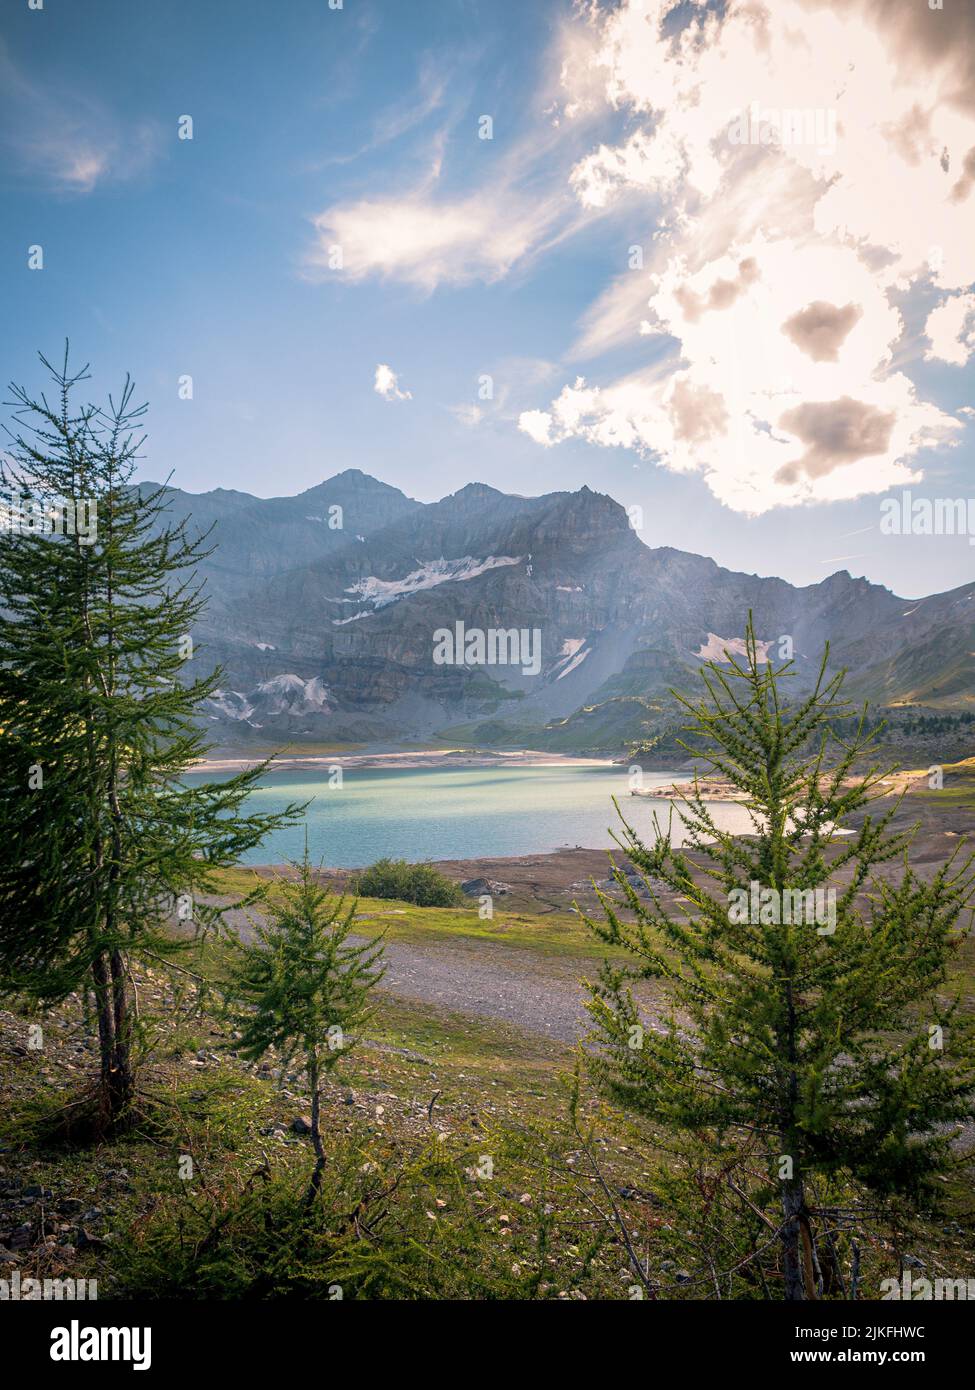 Beautiful Alpine mountain valley. Pine trees line a steep mountain side and high peaks fade in the hazy distance. Stock Photo